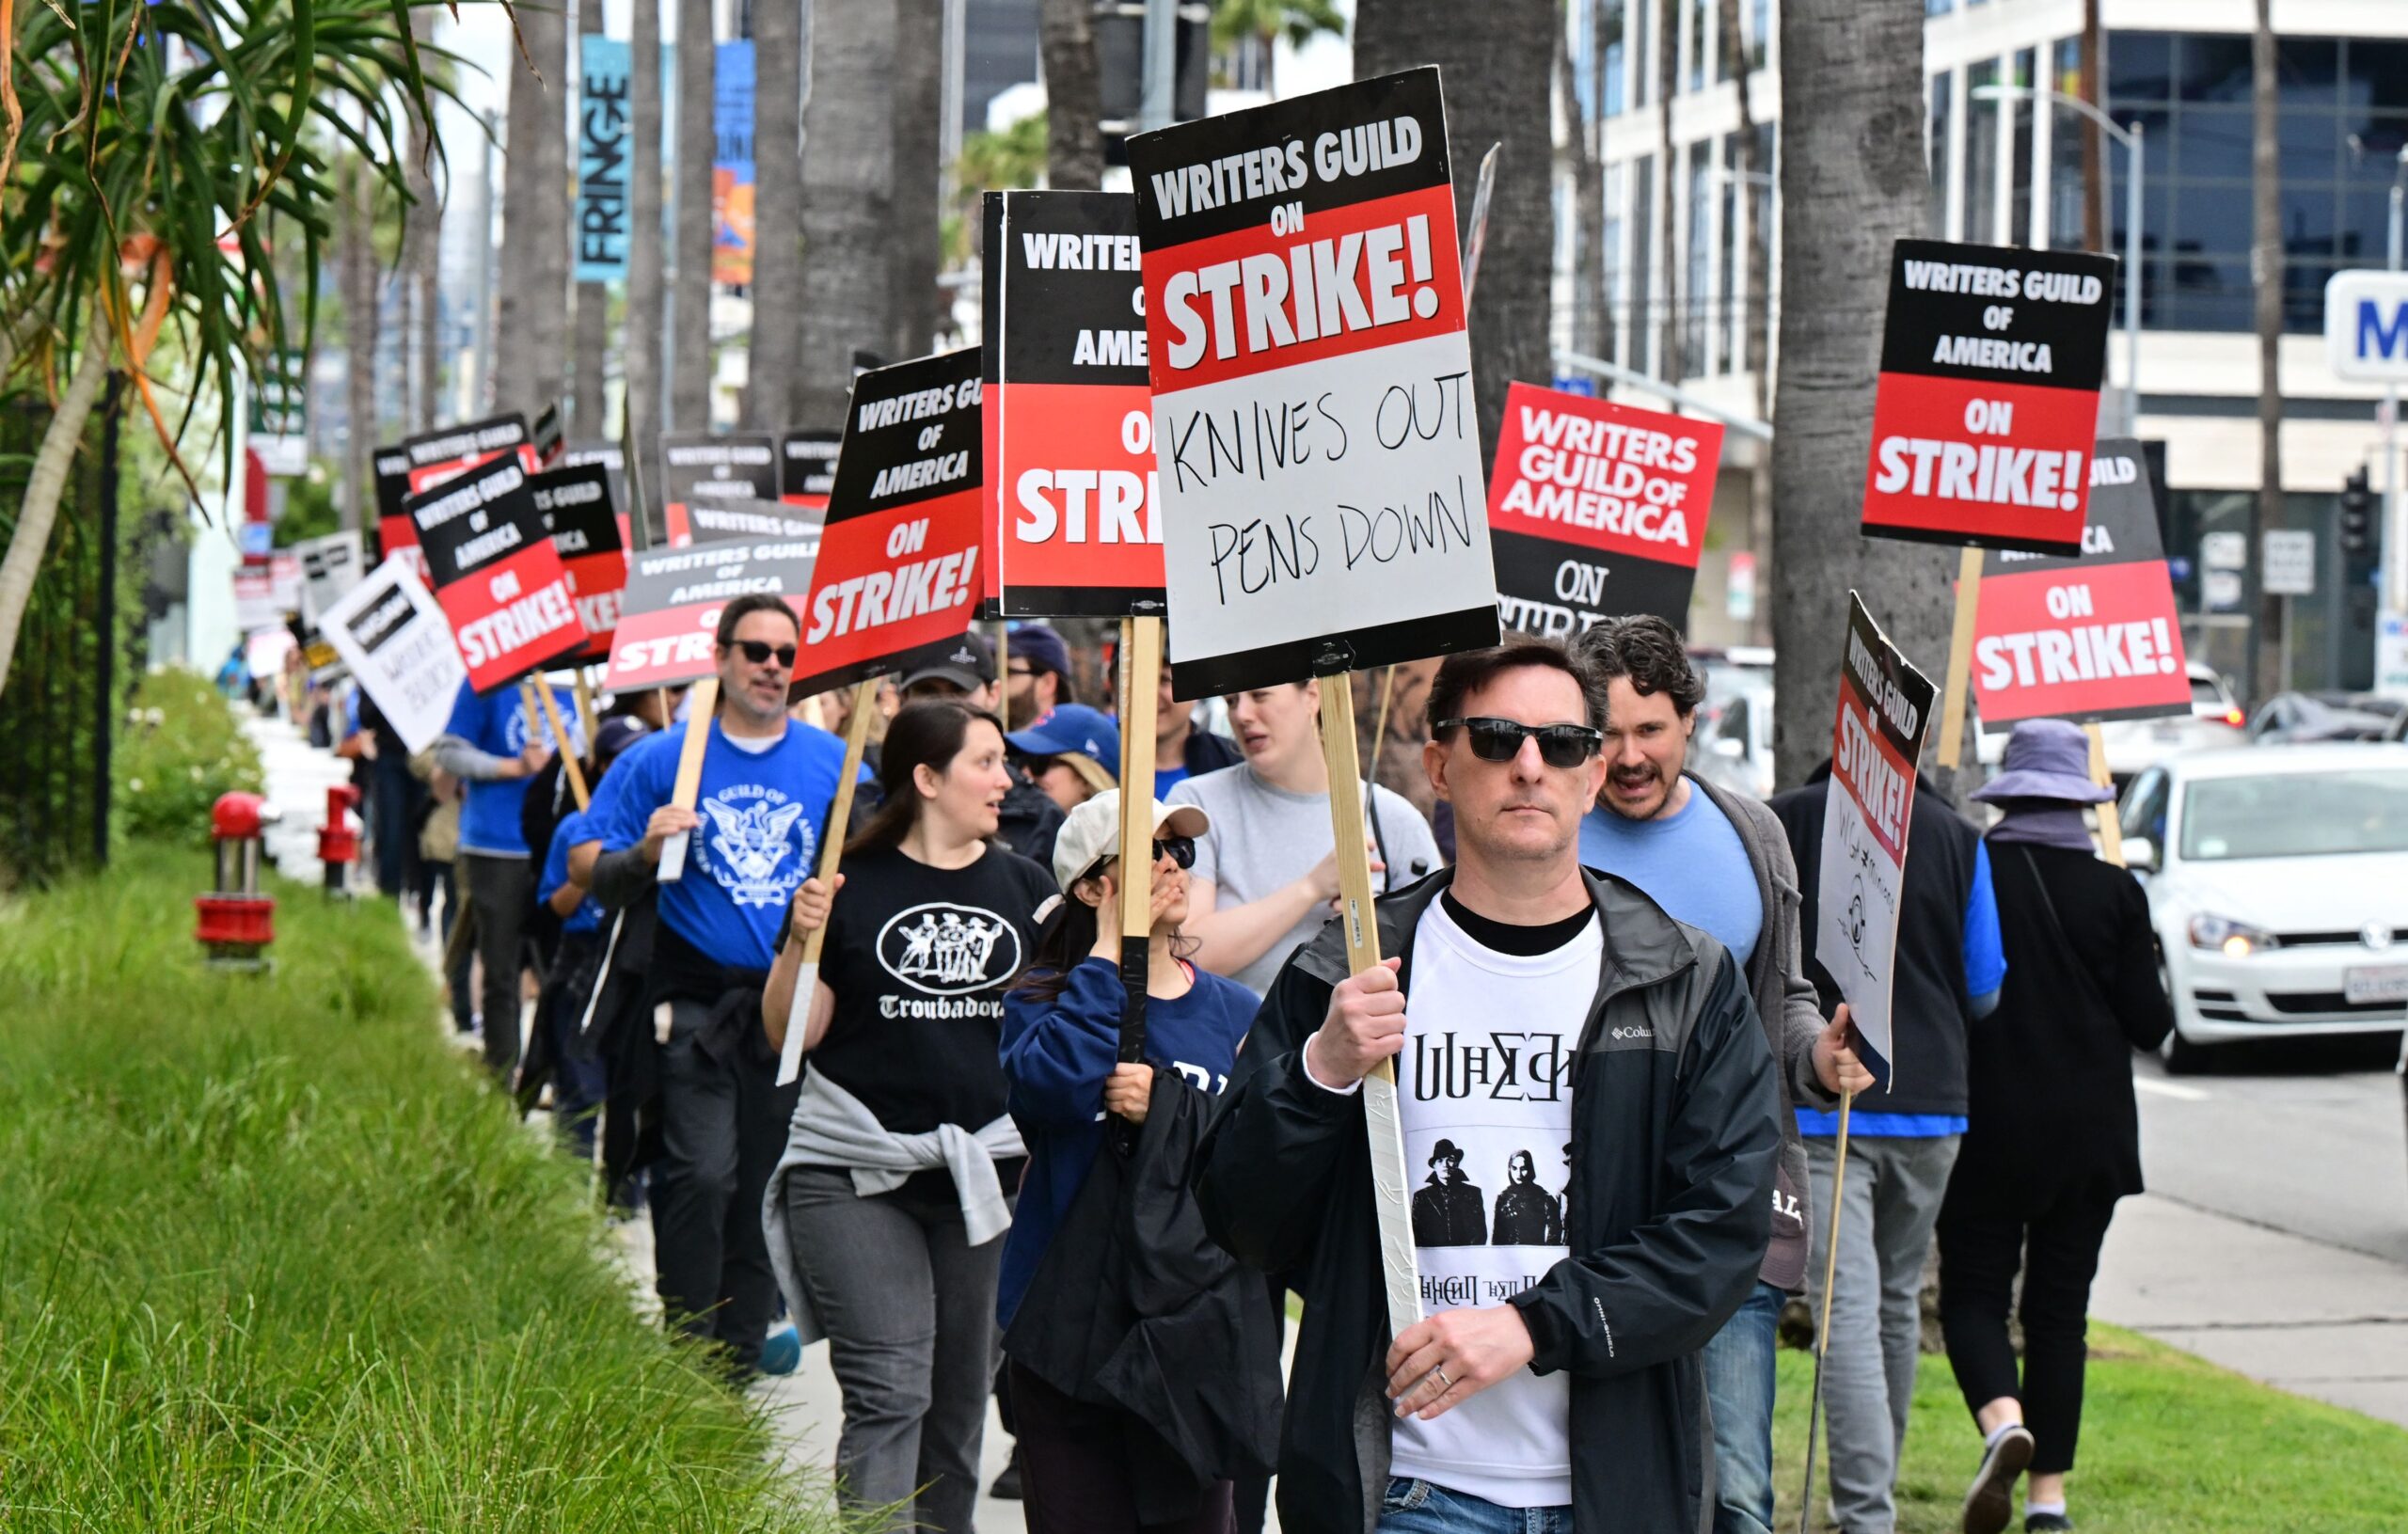 Hollywood writers’ strike delays new woke content.